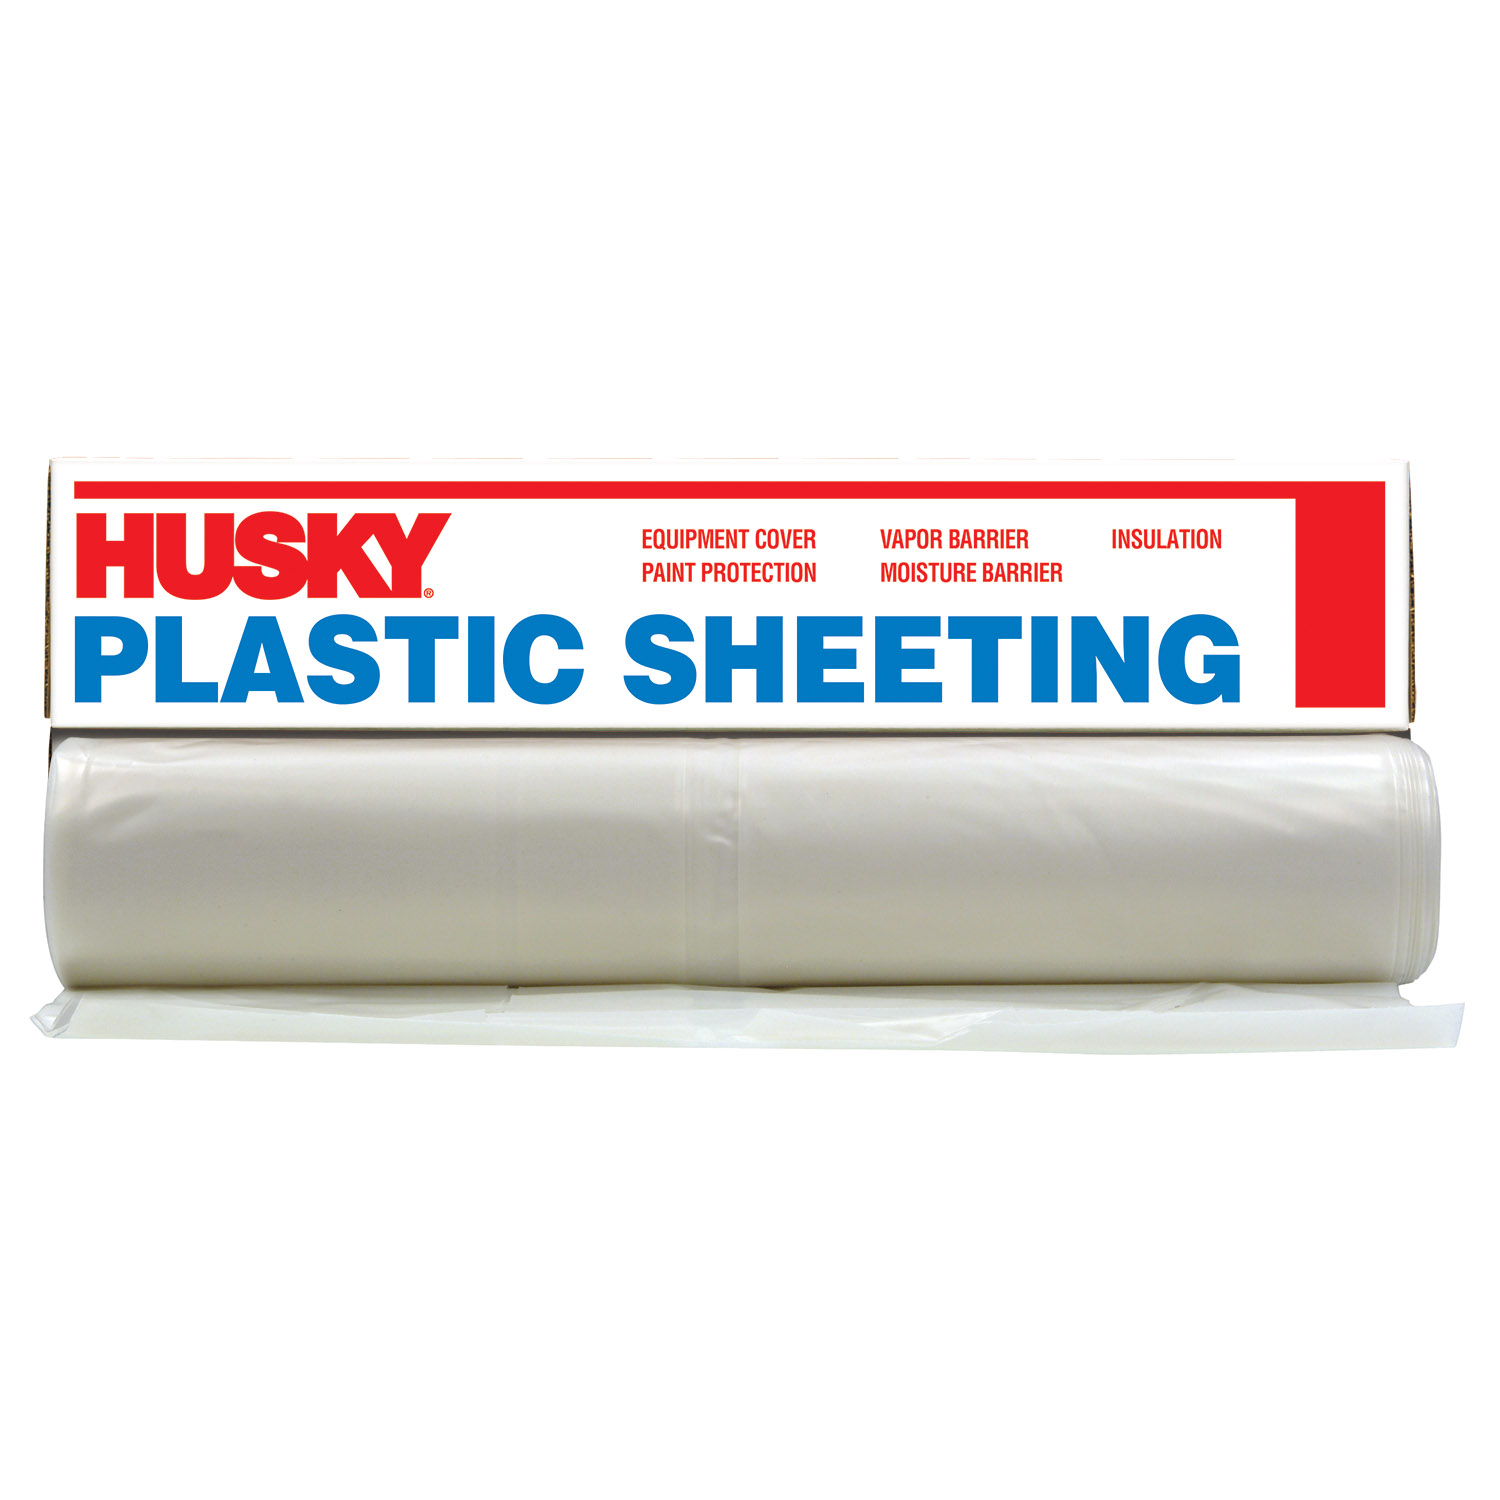 Husky HK42WC050B 42 Gallon Contractor Clean-Up Bags - Black (Pack of 50)  for sale online